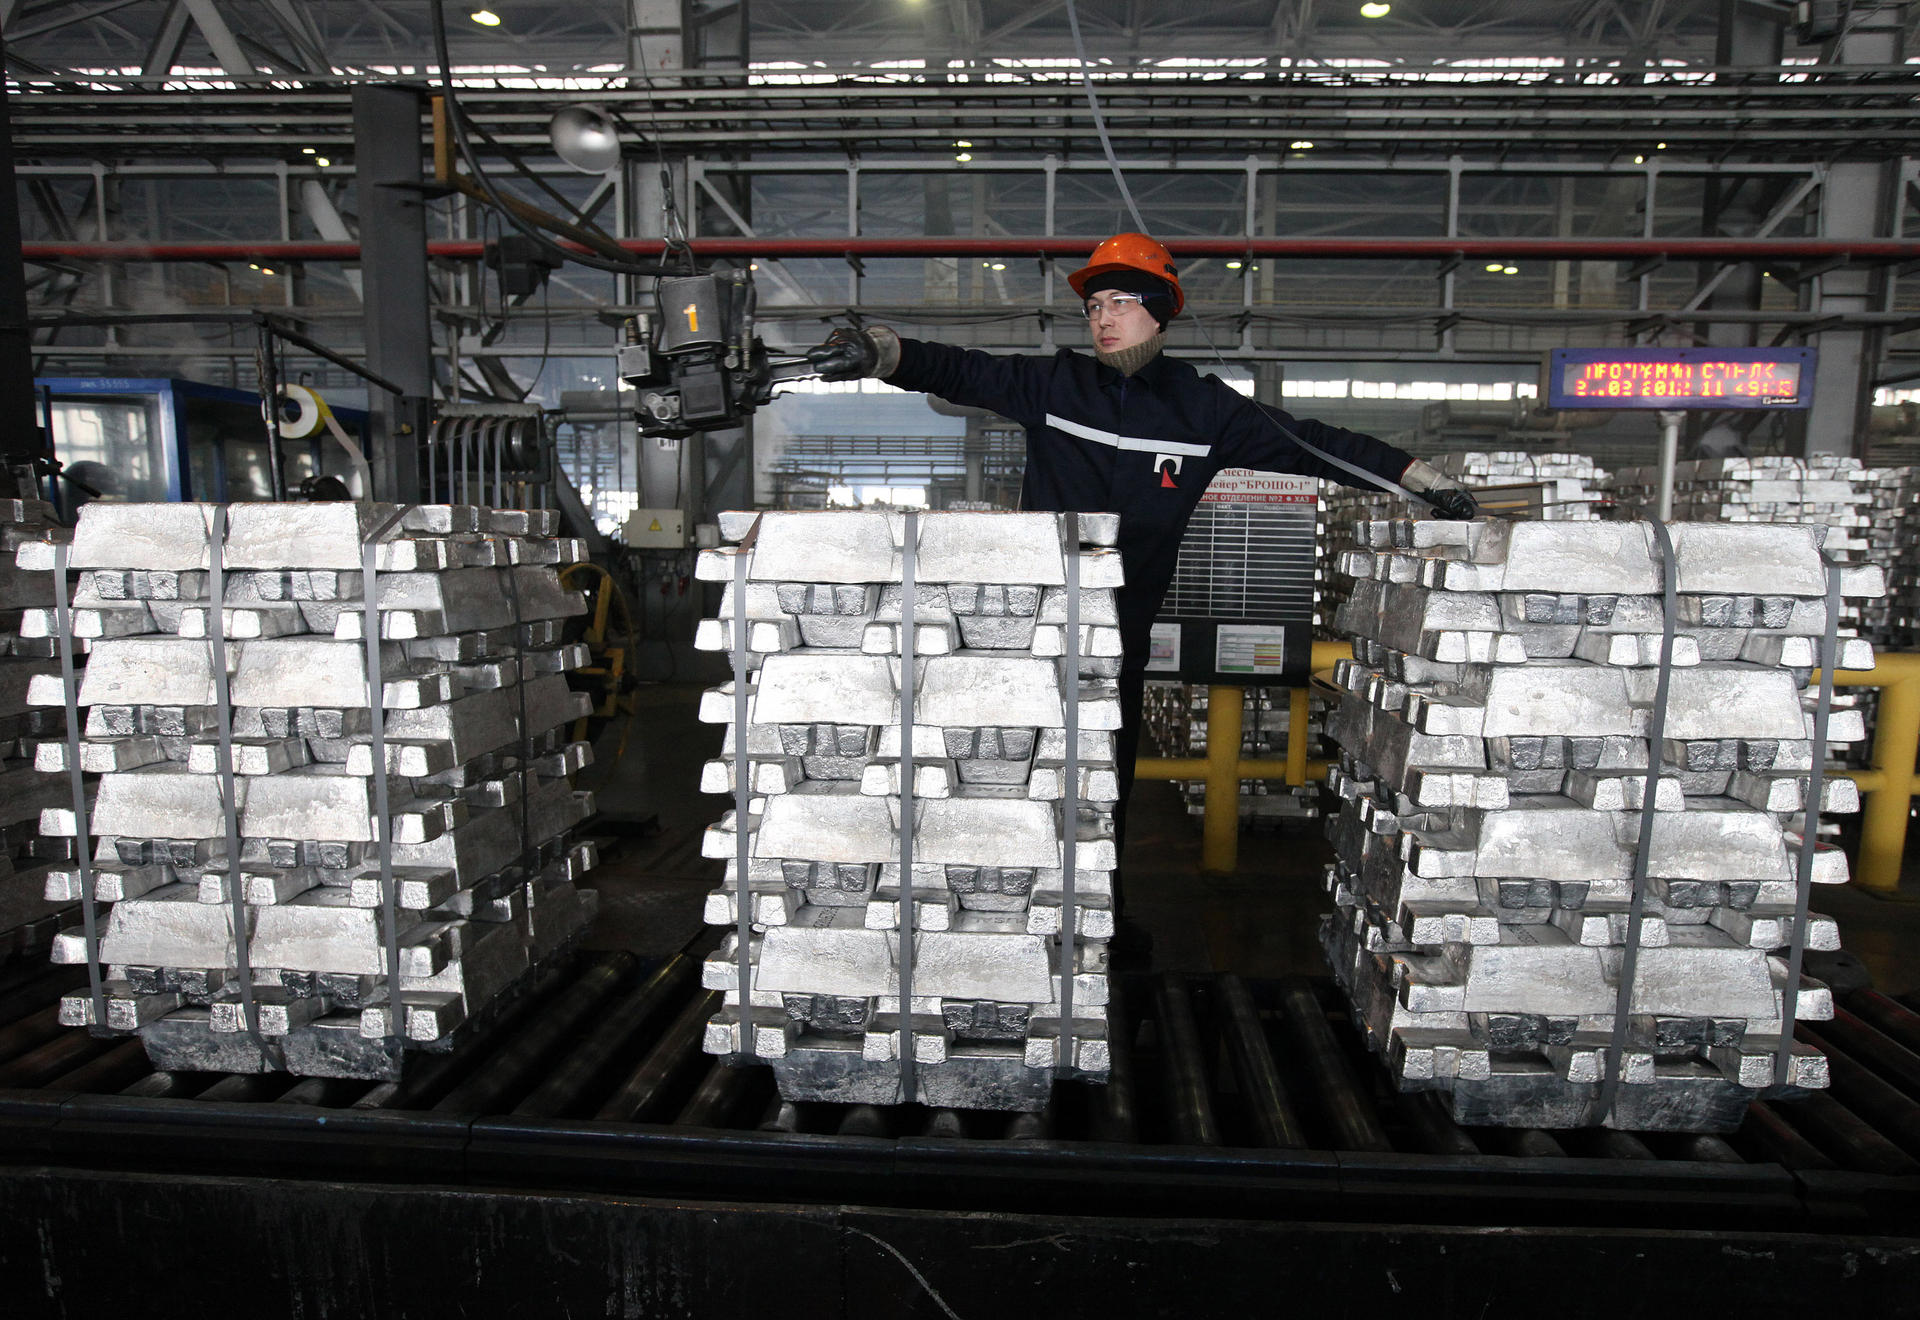 Chalco warned of more tough times for the aluminium industry.